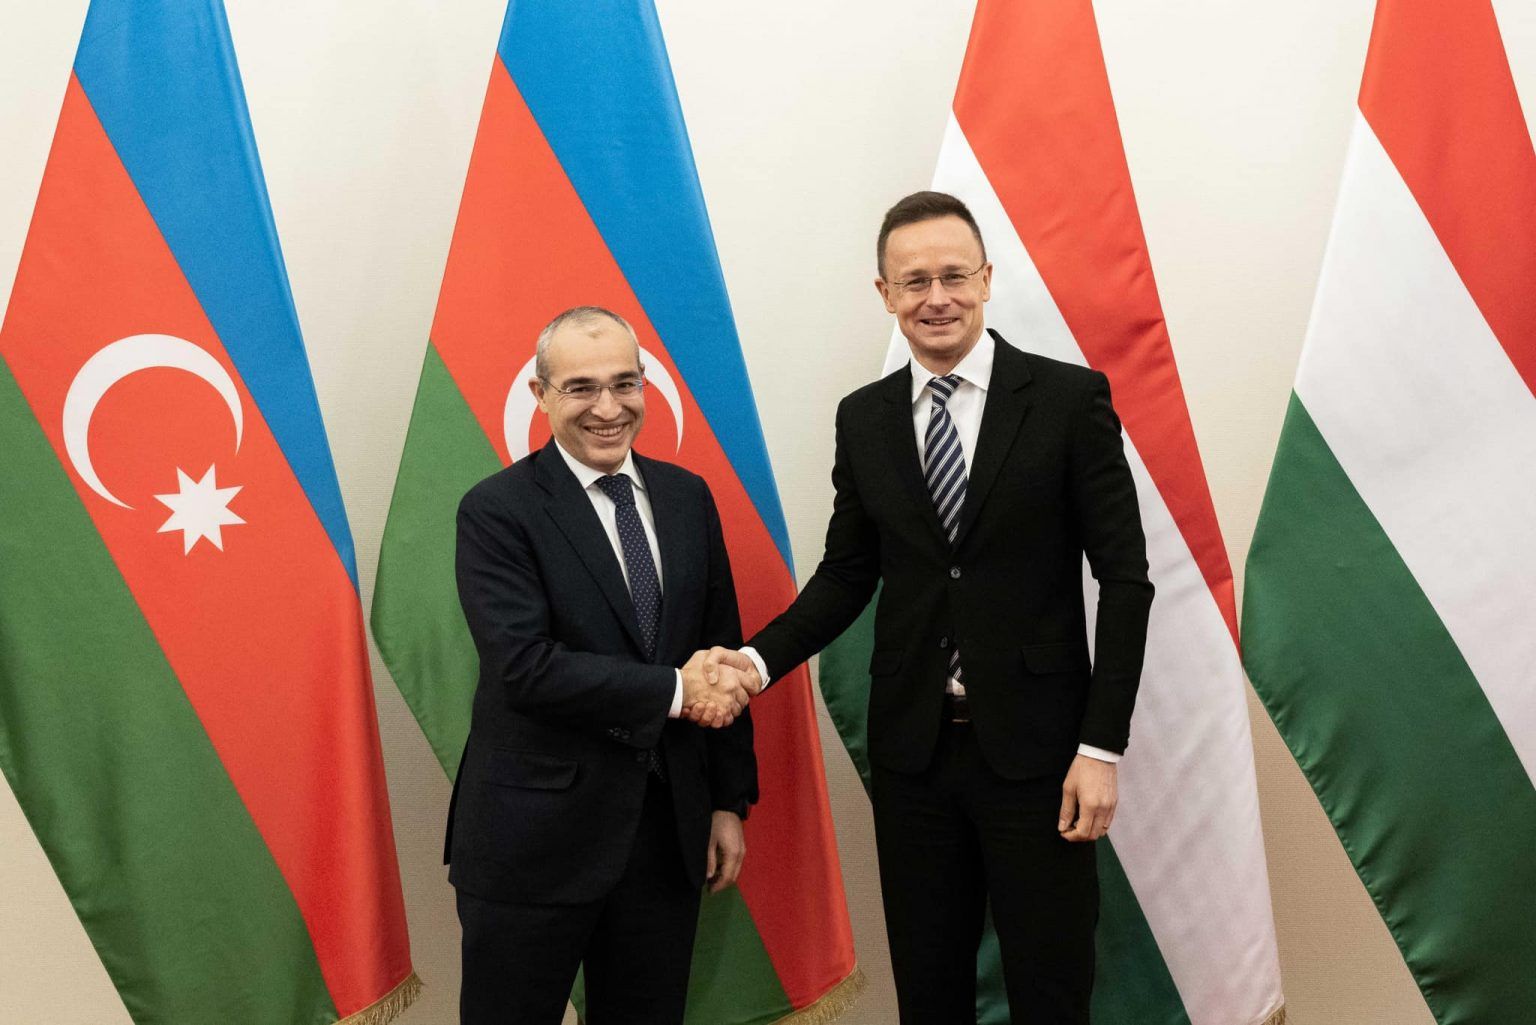 European nations ask EC to finance gas supplies from Azerbaijan to guarantee future sources